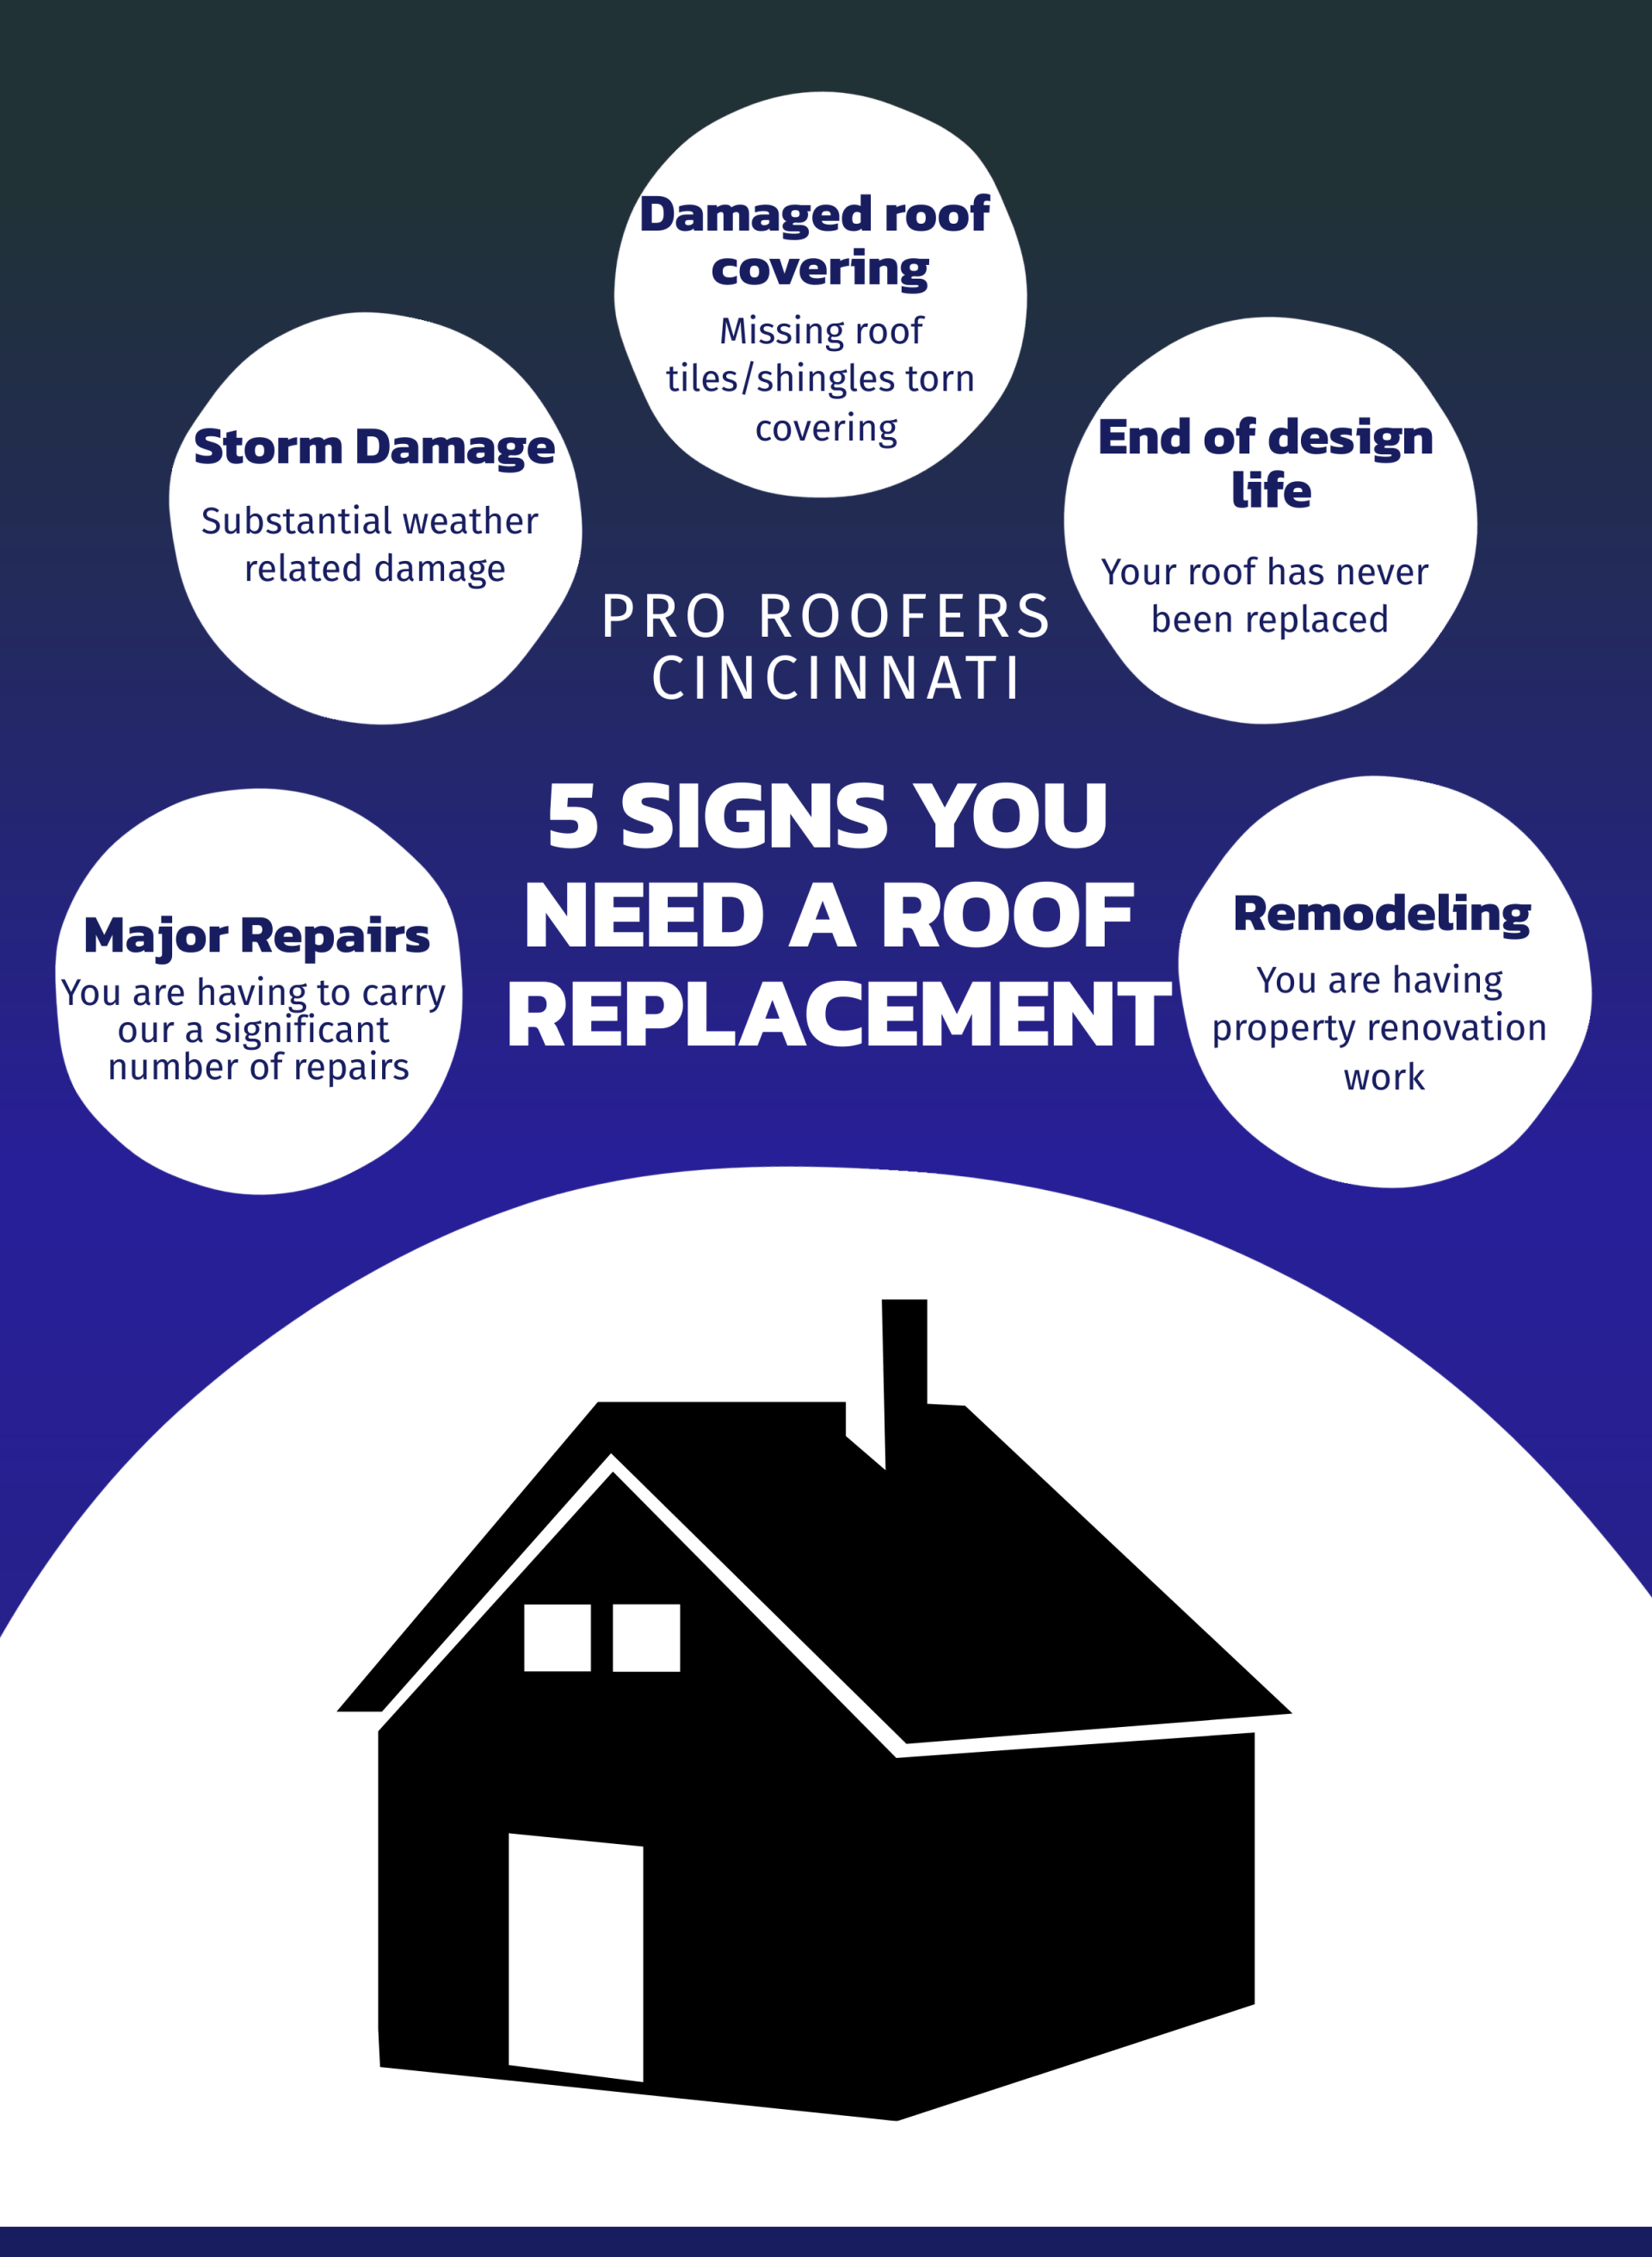 Roofers Cincinnati - 5 signs you need a roof replacement